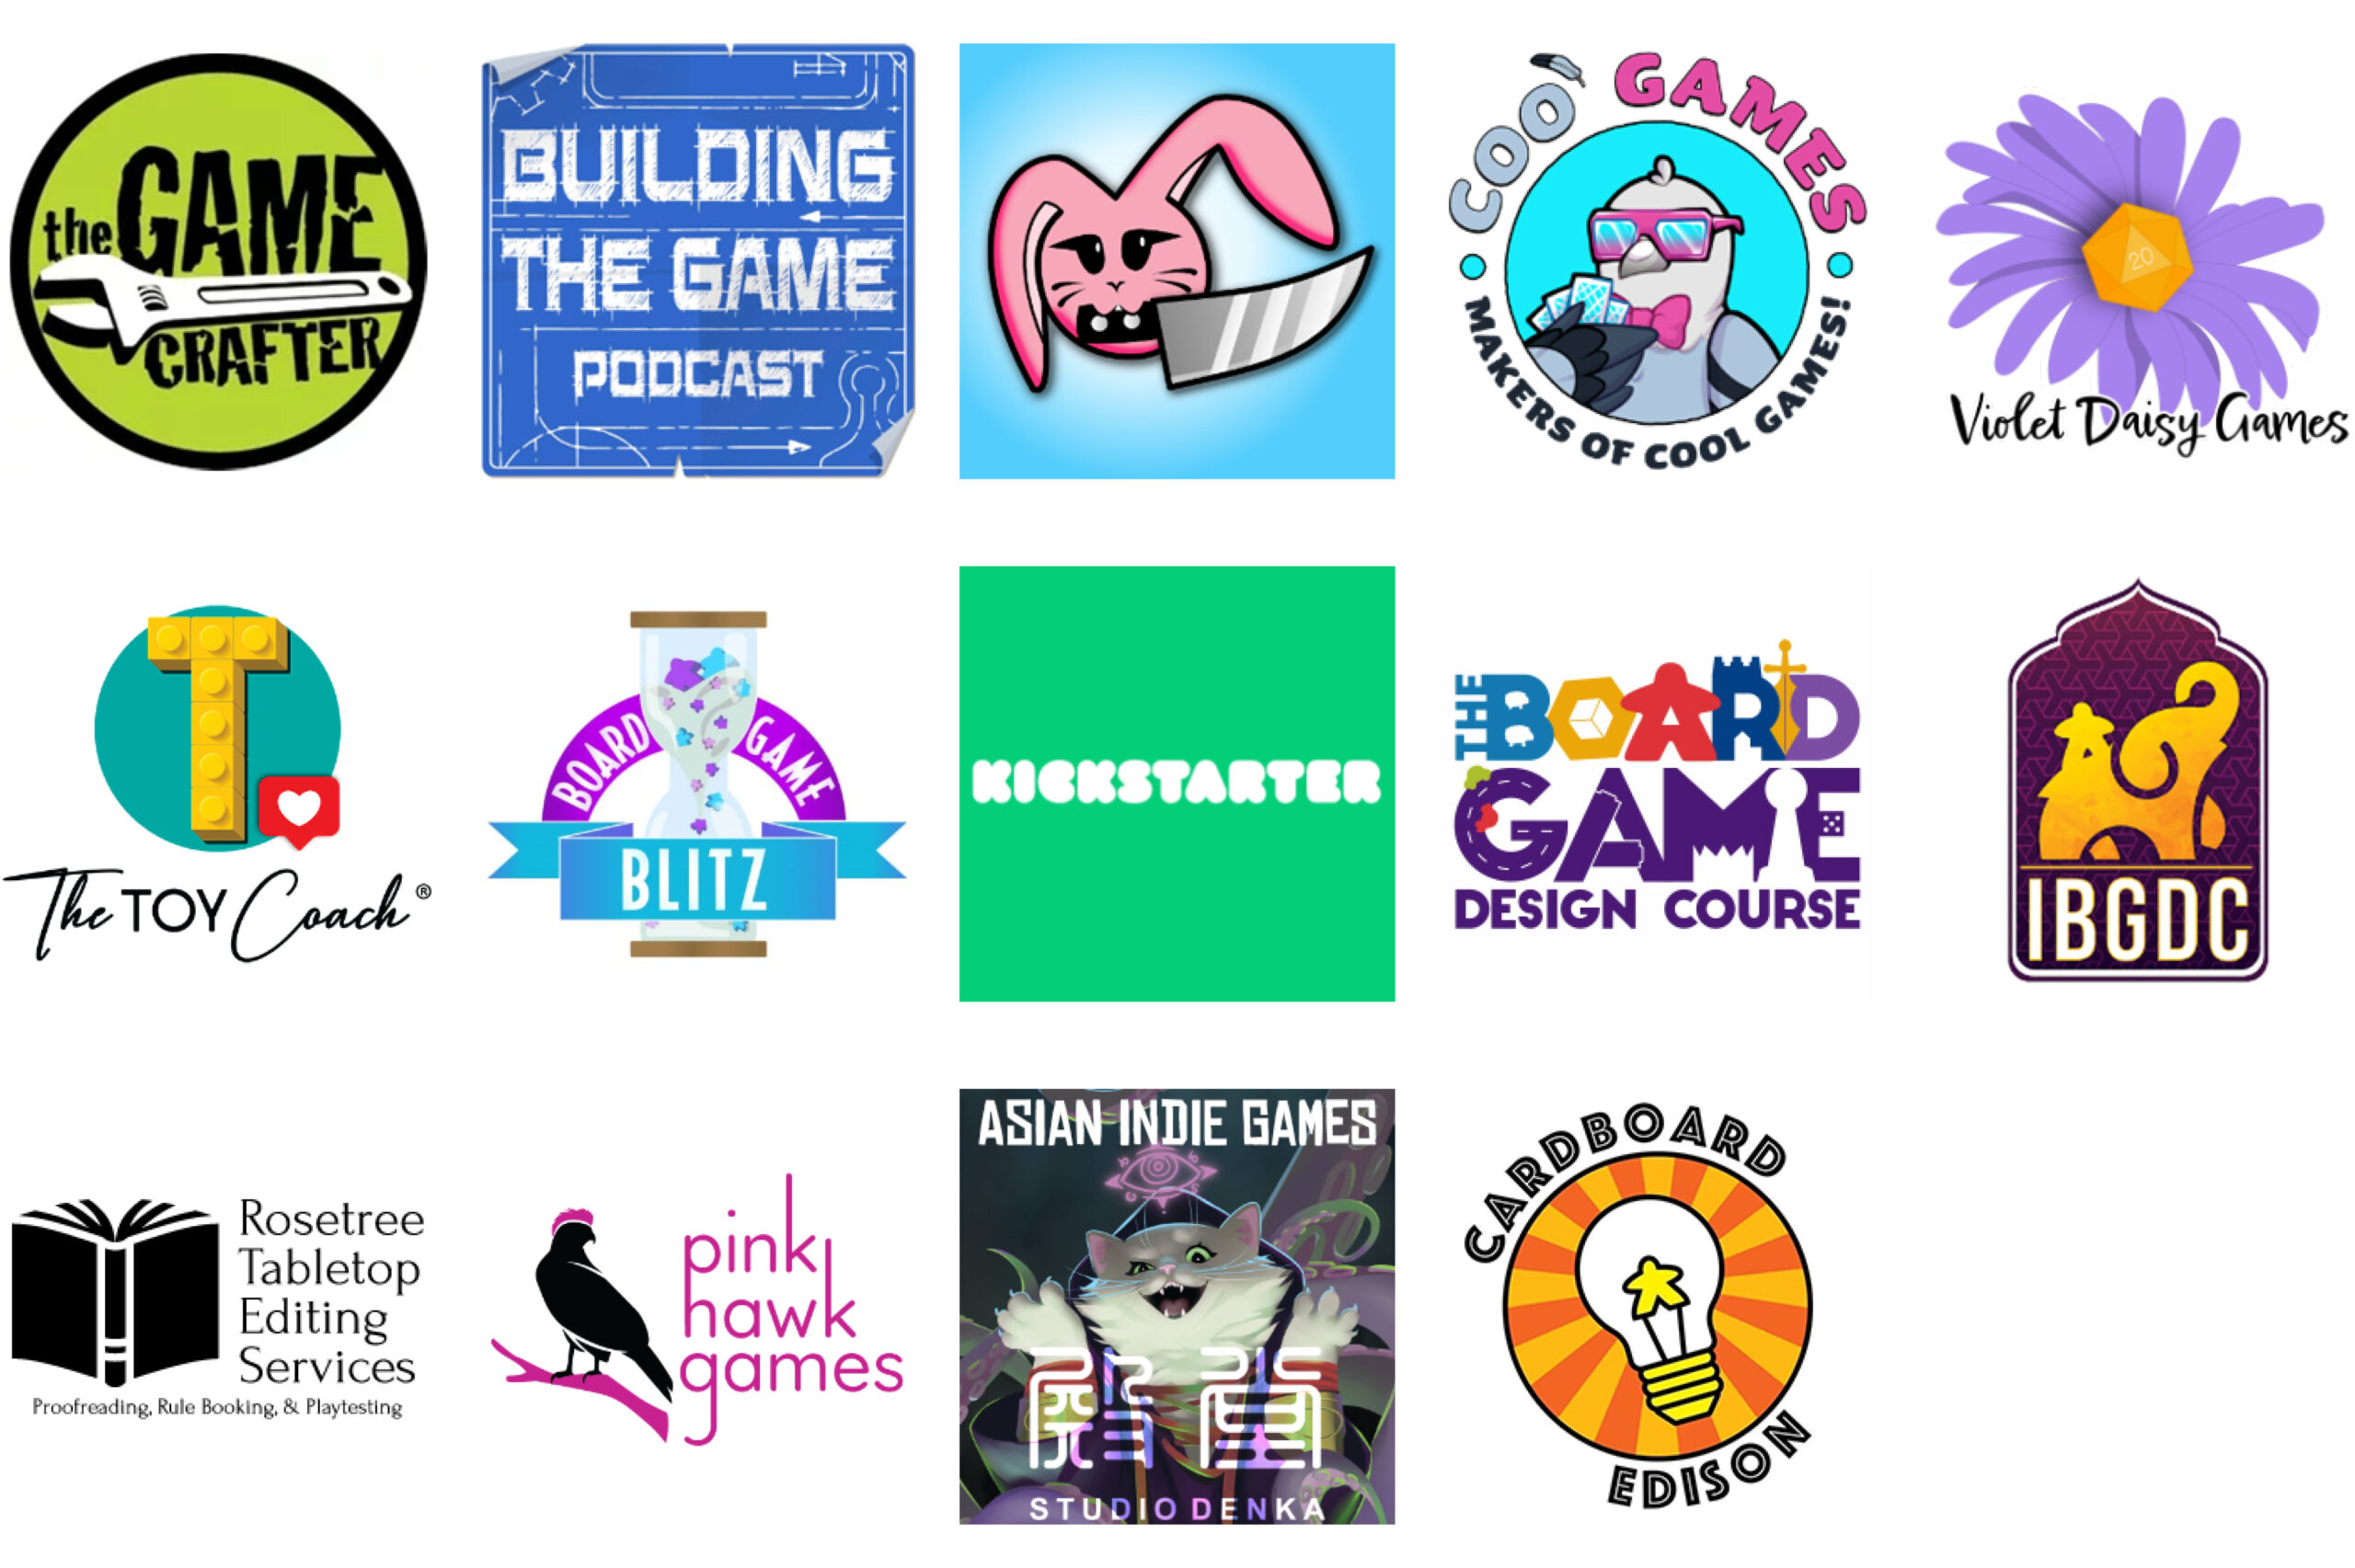 Sponsor logos for Jan 2024: Sponsor logos for Jan 2024: The Game Crafter, Building the Game Podcast, Knife Bunny, Coo Games, Violet Daisy Games, The Toy Coach, Board Game Blitz, Kickstarter, The Board Game Design Course, IBGDC, Rosetree Tabletop Editing Services, Pink Hawk Games, Studio Denka, Cardboard Edison